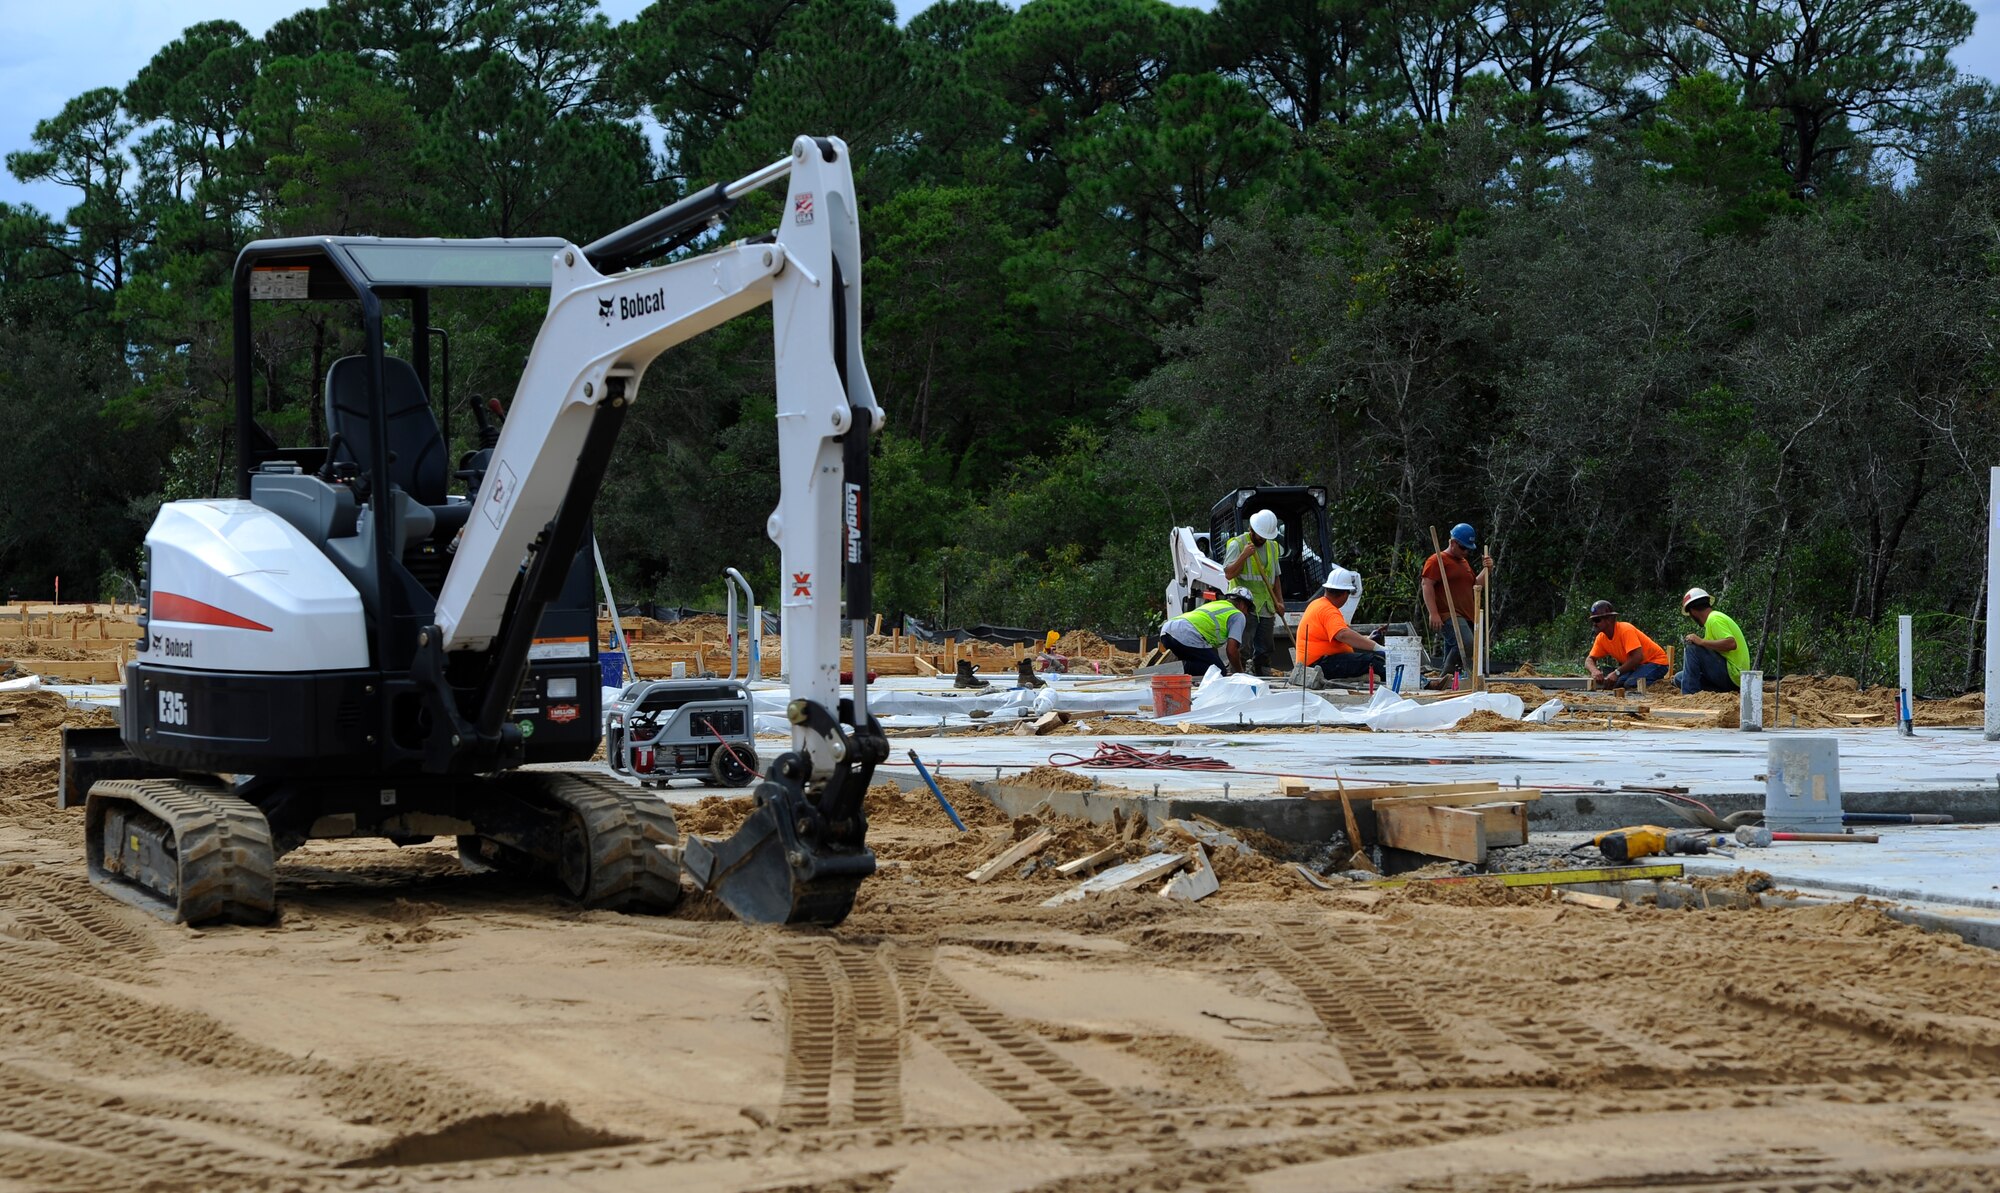 Construction workers work on a concrete pad for the future Osprey neighborhood on Hurlburt Field, Fla., Oct. 2, 2014. The concrete pads are the first step of vertical construction of the new homes. (U.S. Air Force photo/Staff Sgt. Sarah Hanson)